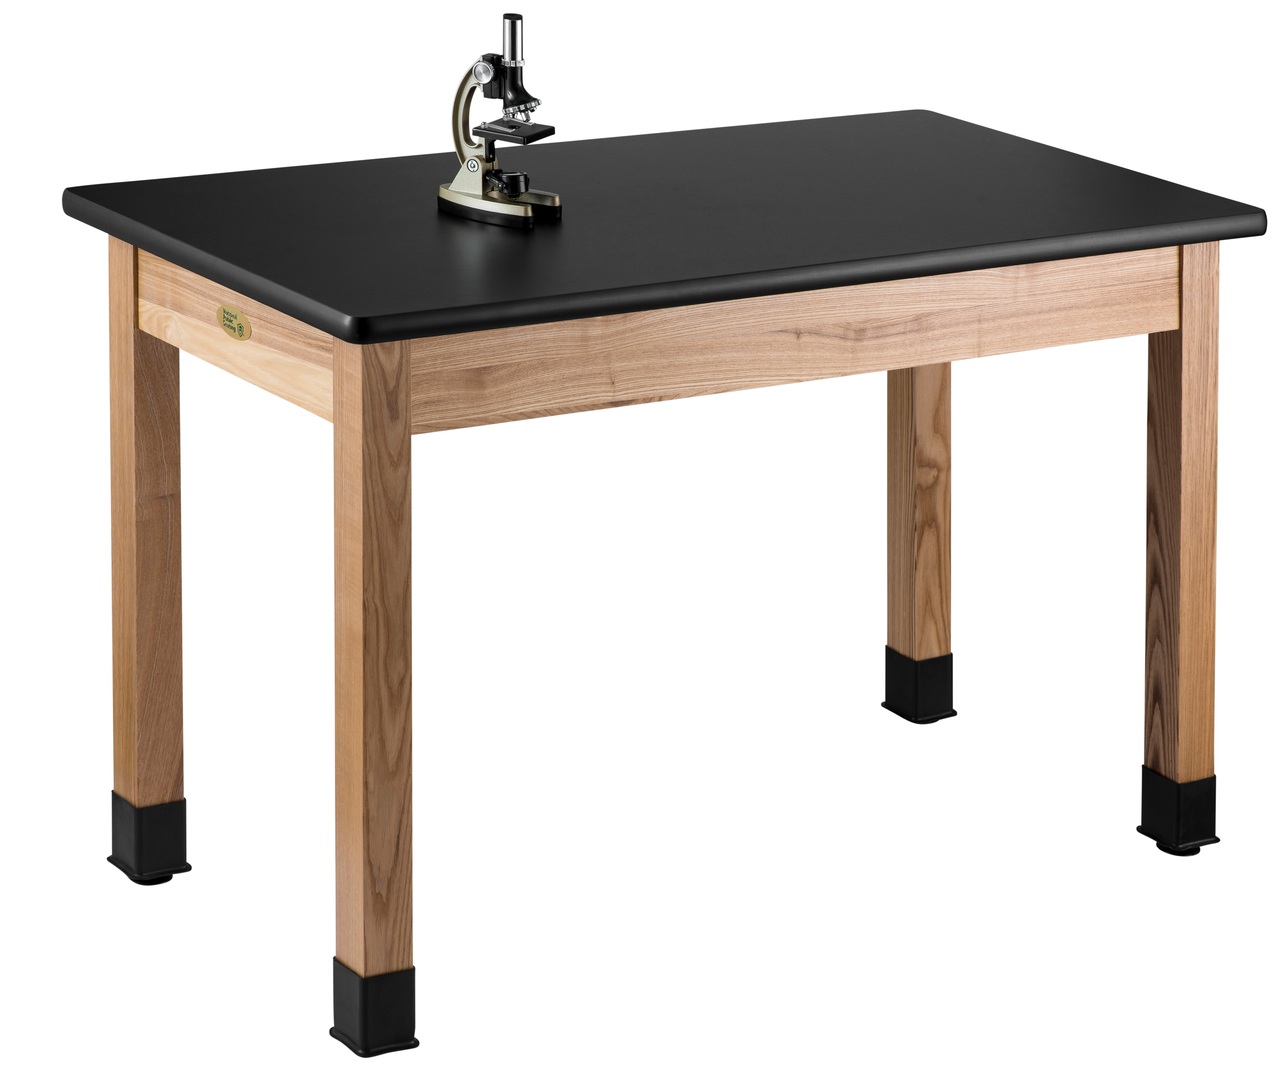 NPS Wood Science Lab Table -  24"x54"x30" -  HPL Top - Black Top and Ash Leg